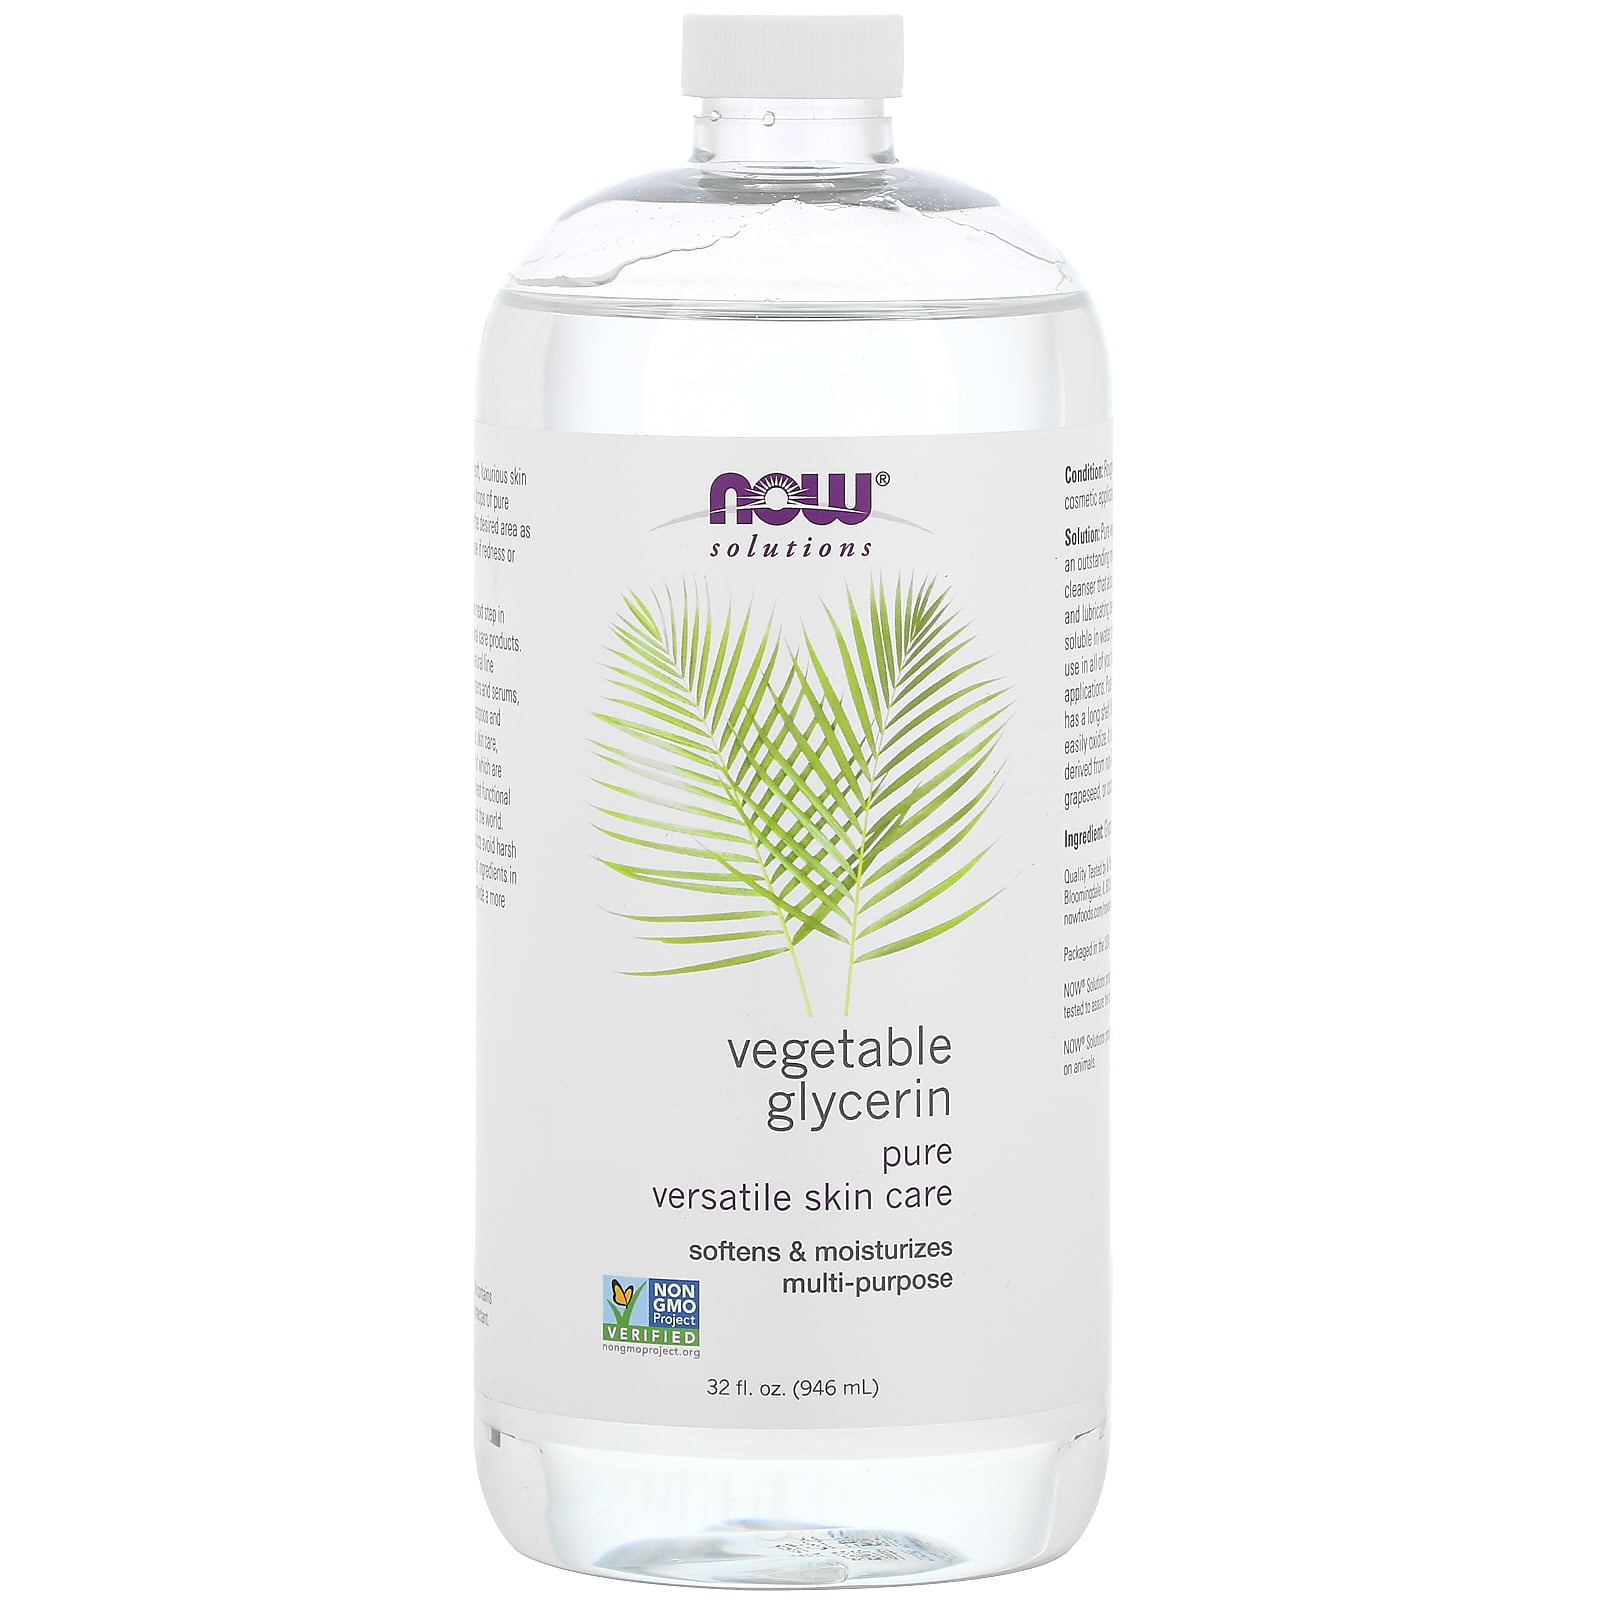  NV Superfoods - Organic Vegetable Glycerin - 32 Fl Oz - USP  Food Grade, 100% Natural, Carrier for Essential Oils, Perfect for Skin,  Hair & Nails as well as Arts